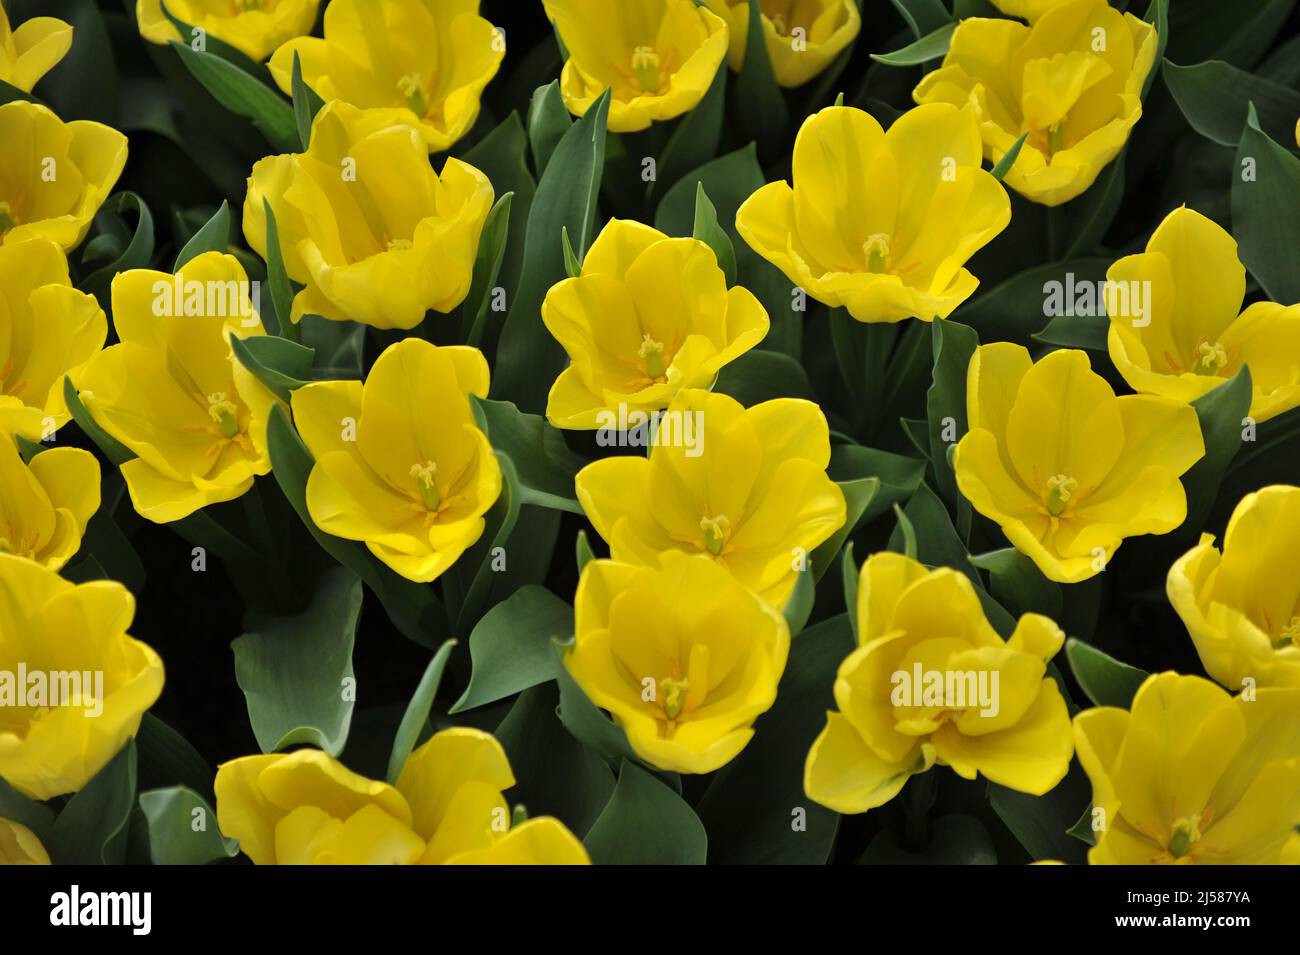 Yellow Triumph tulips (Tulipa) Harvest Moon bloom in a garden in March Stock Photo